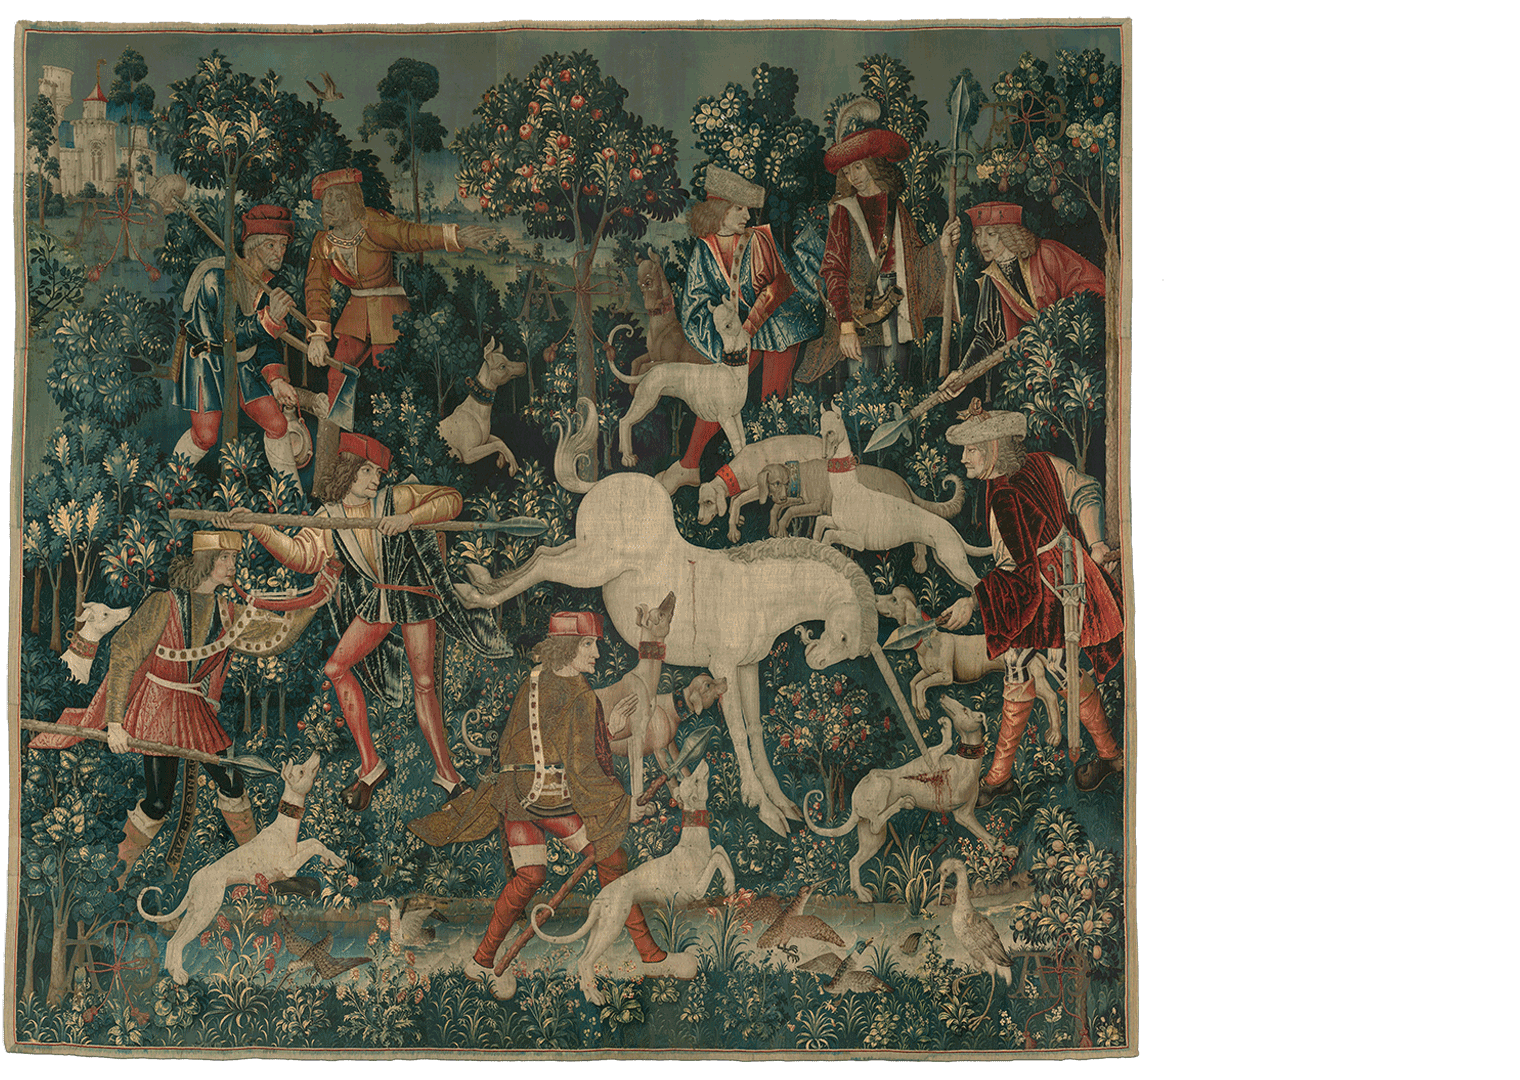 In this tapestry, the unicorn bucks and stabs one of the hounds with its horn, opening a large red wound. More hunters and dogs surround the animal, suggesting the hunt is reaching its climax.